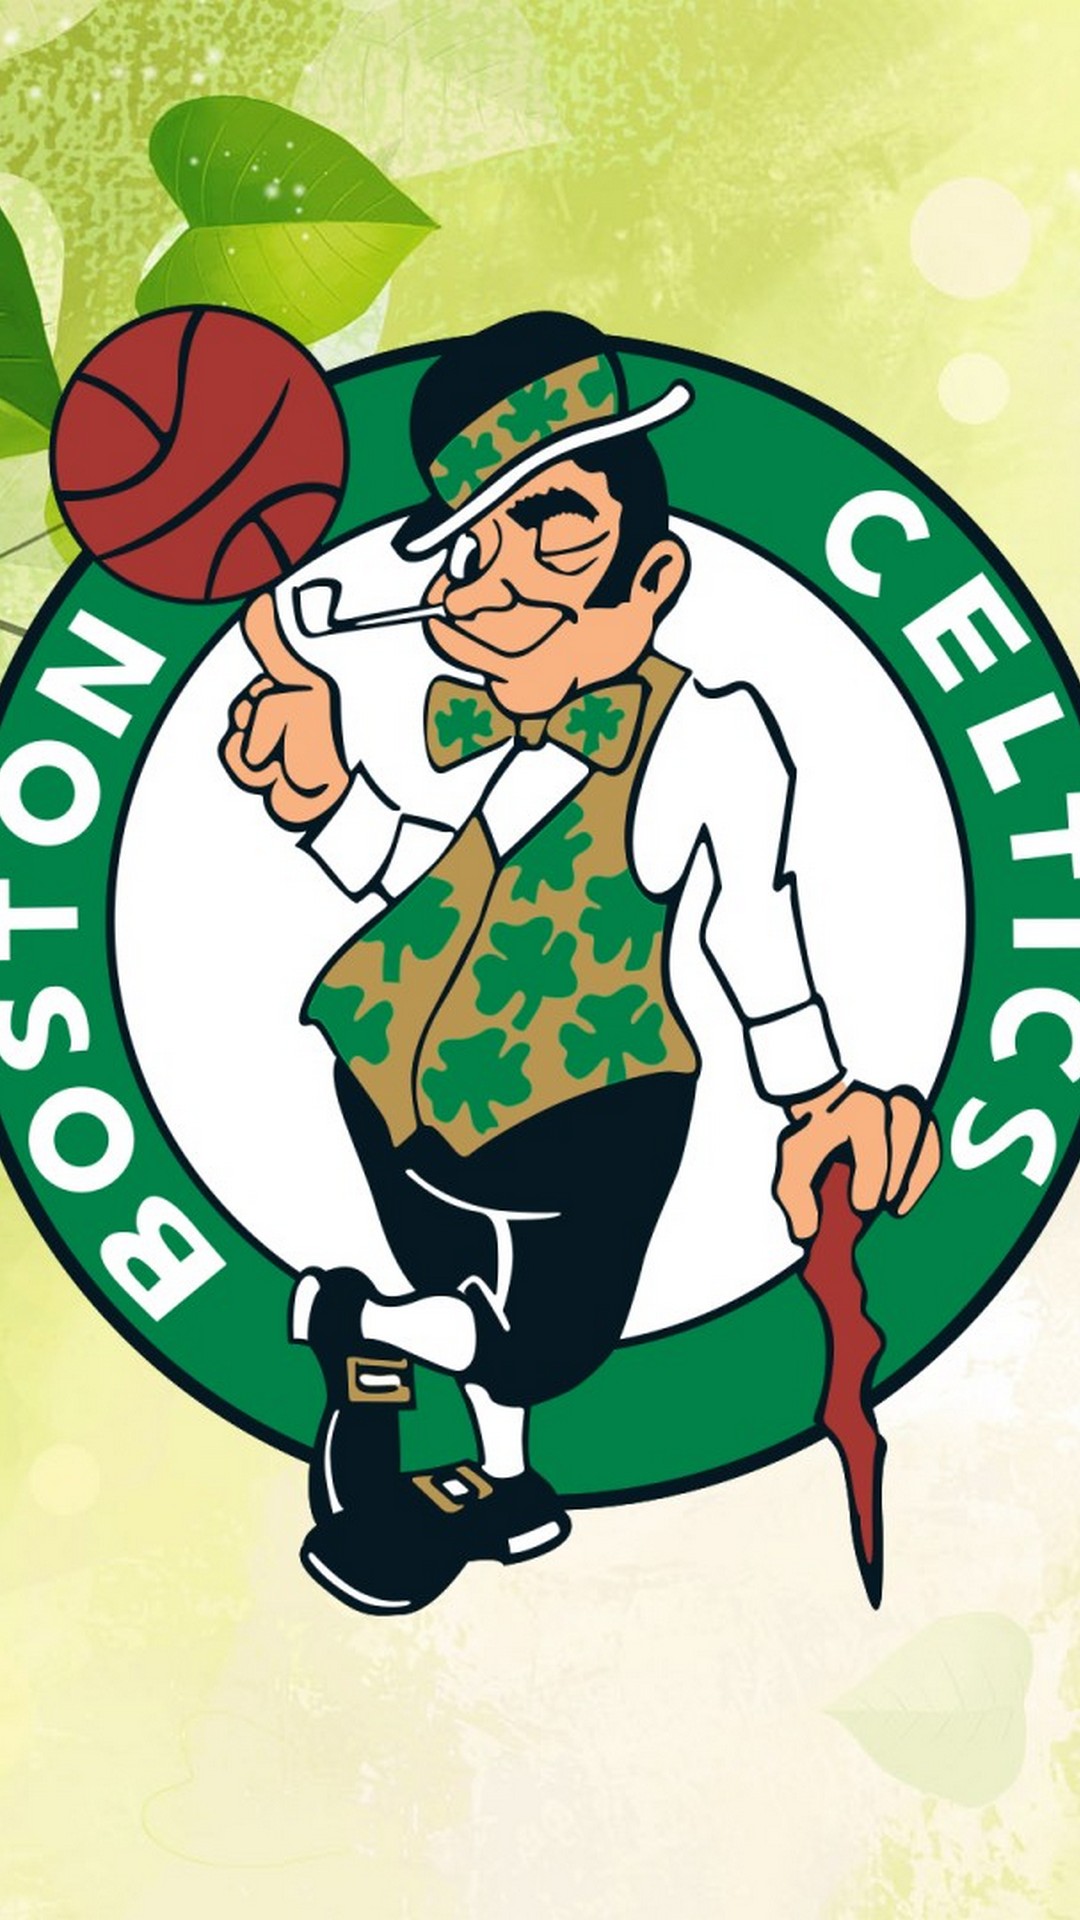 Boston Celtics Android Wallpaper with image resolution 1080x1920 pixel. You can make this wallpaper for your Android backgrounds, Tablet, Smartphones Screensavers and Mobile Phone Lock Screen